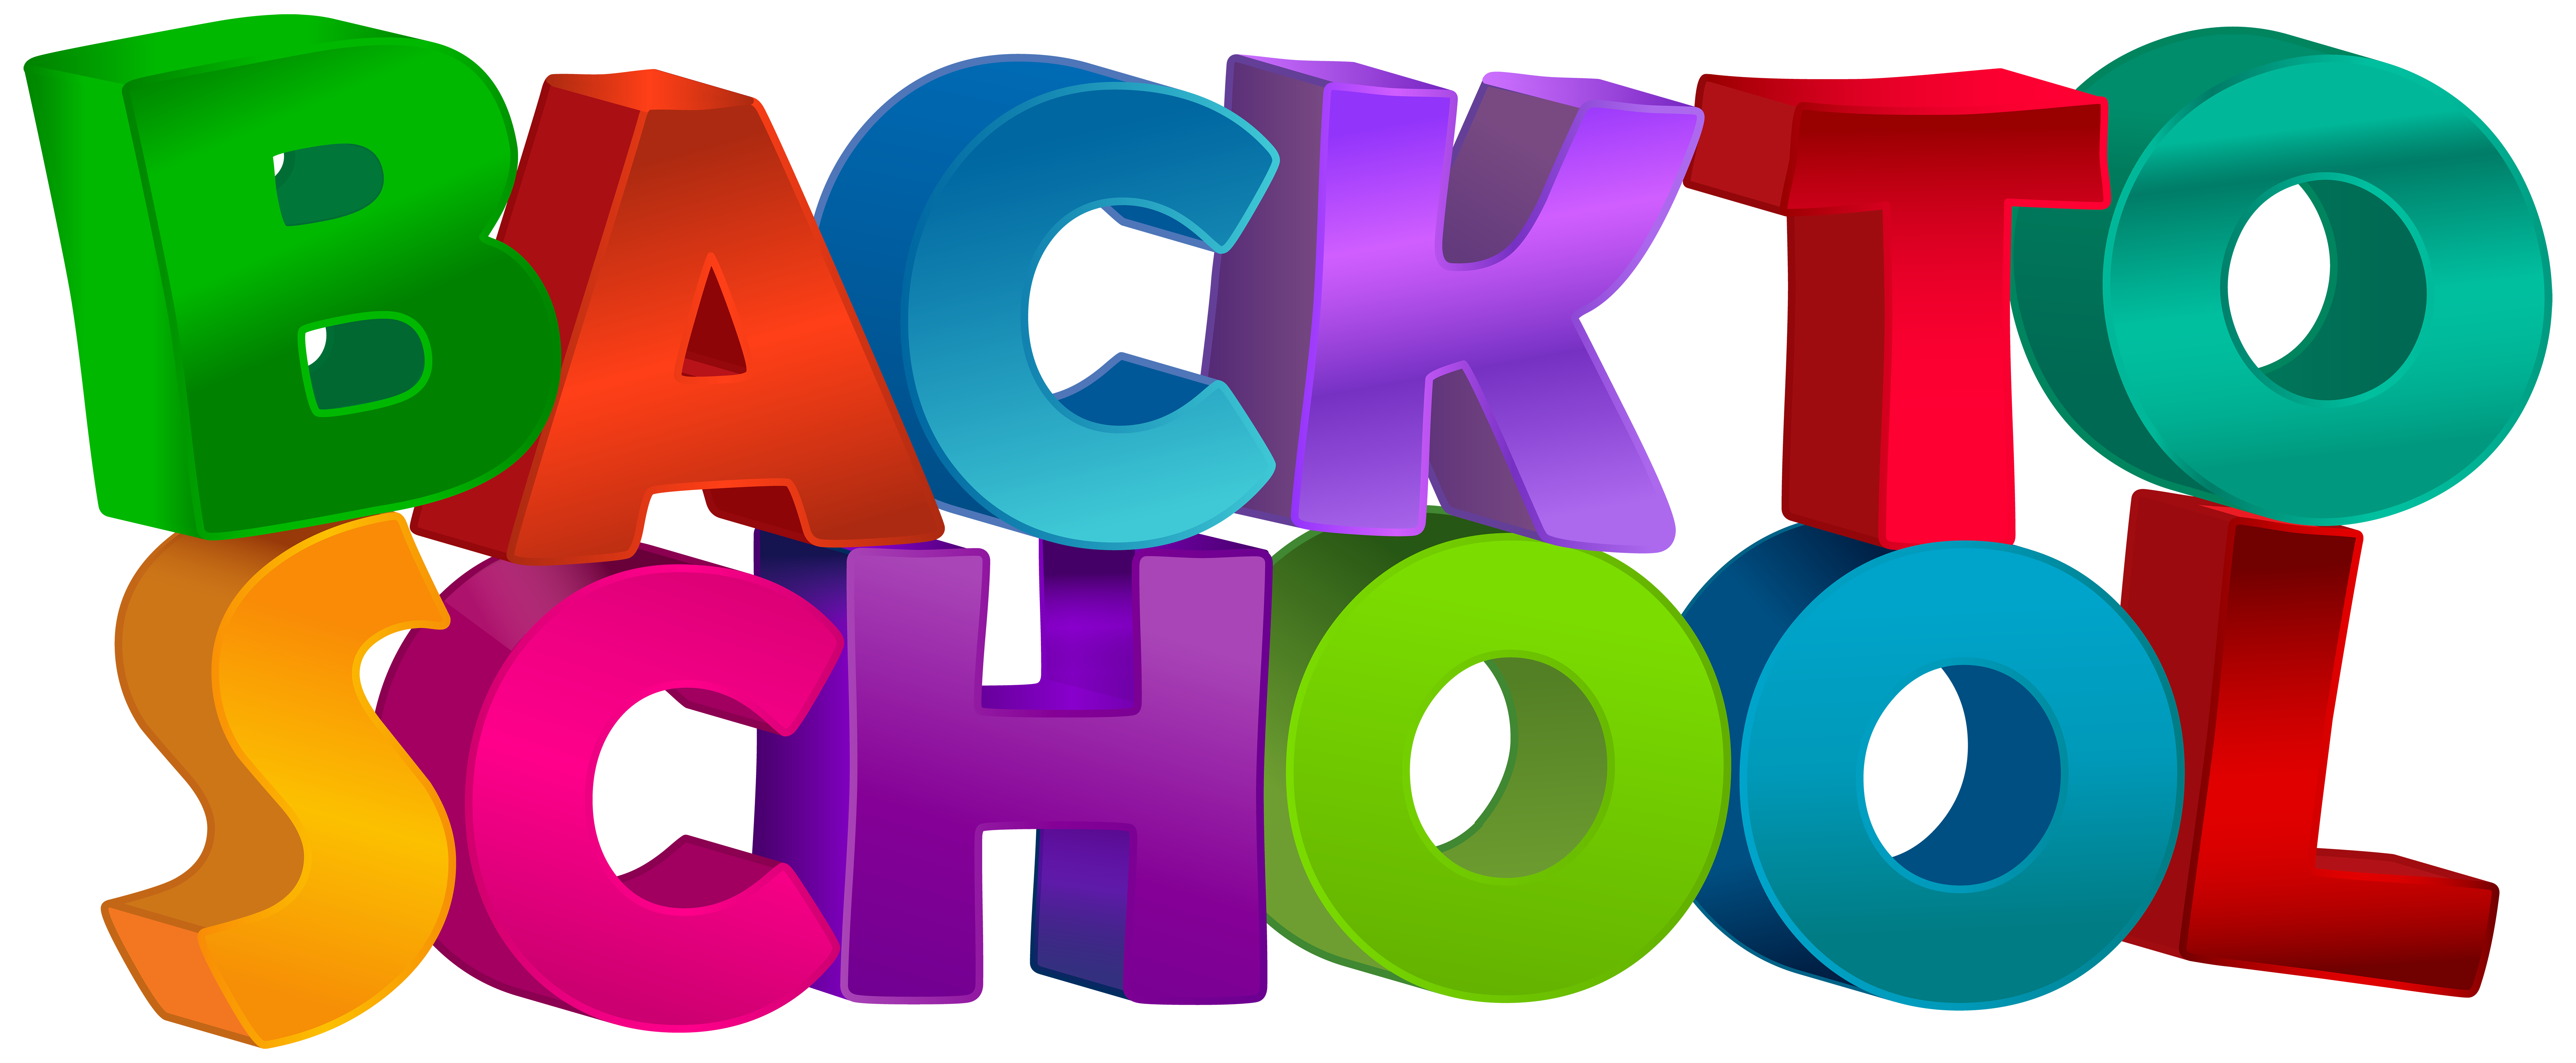 Back To School Text Transparent Clip Art Image Gallery Yopriceville High Quality Images And Transparent Png Free Clipart